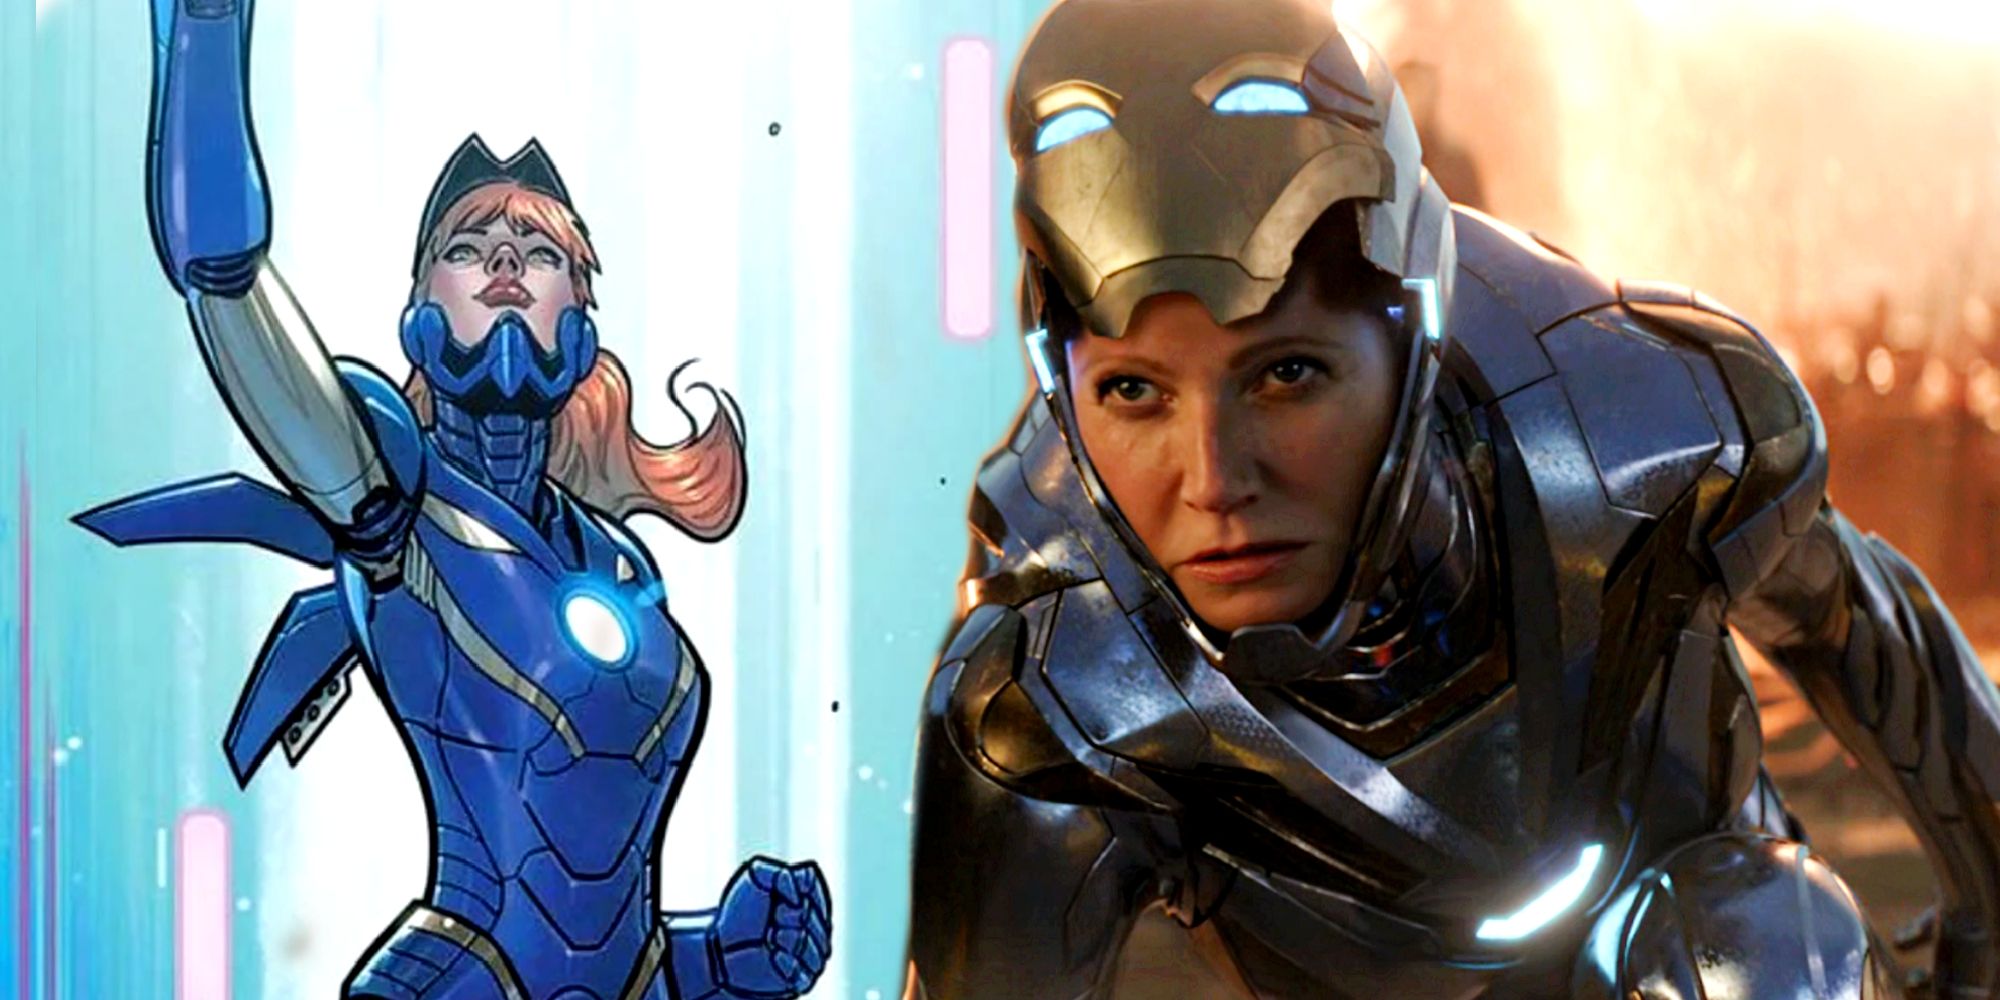 Gwyneth Paltrow as Pepper Potts Rescue in Avengers Endgame